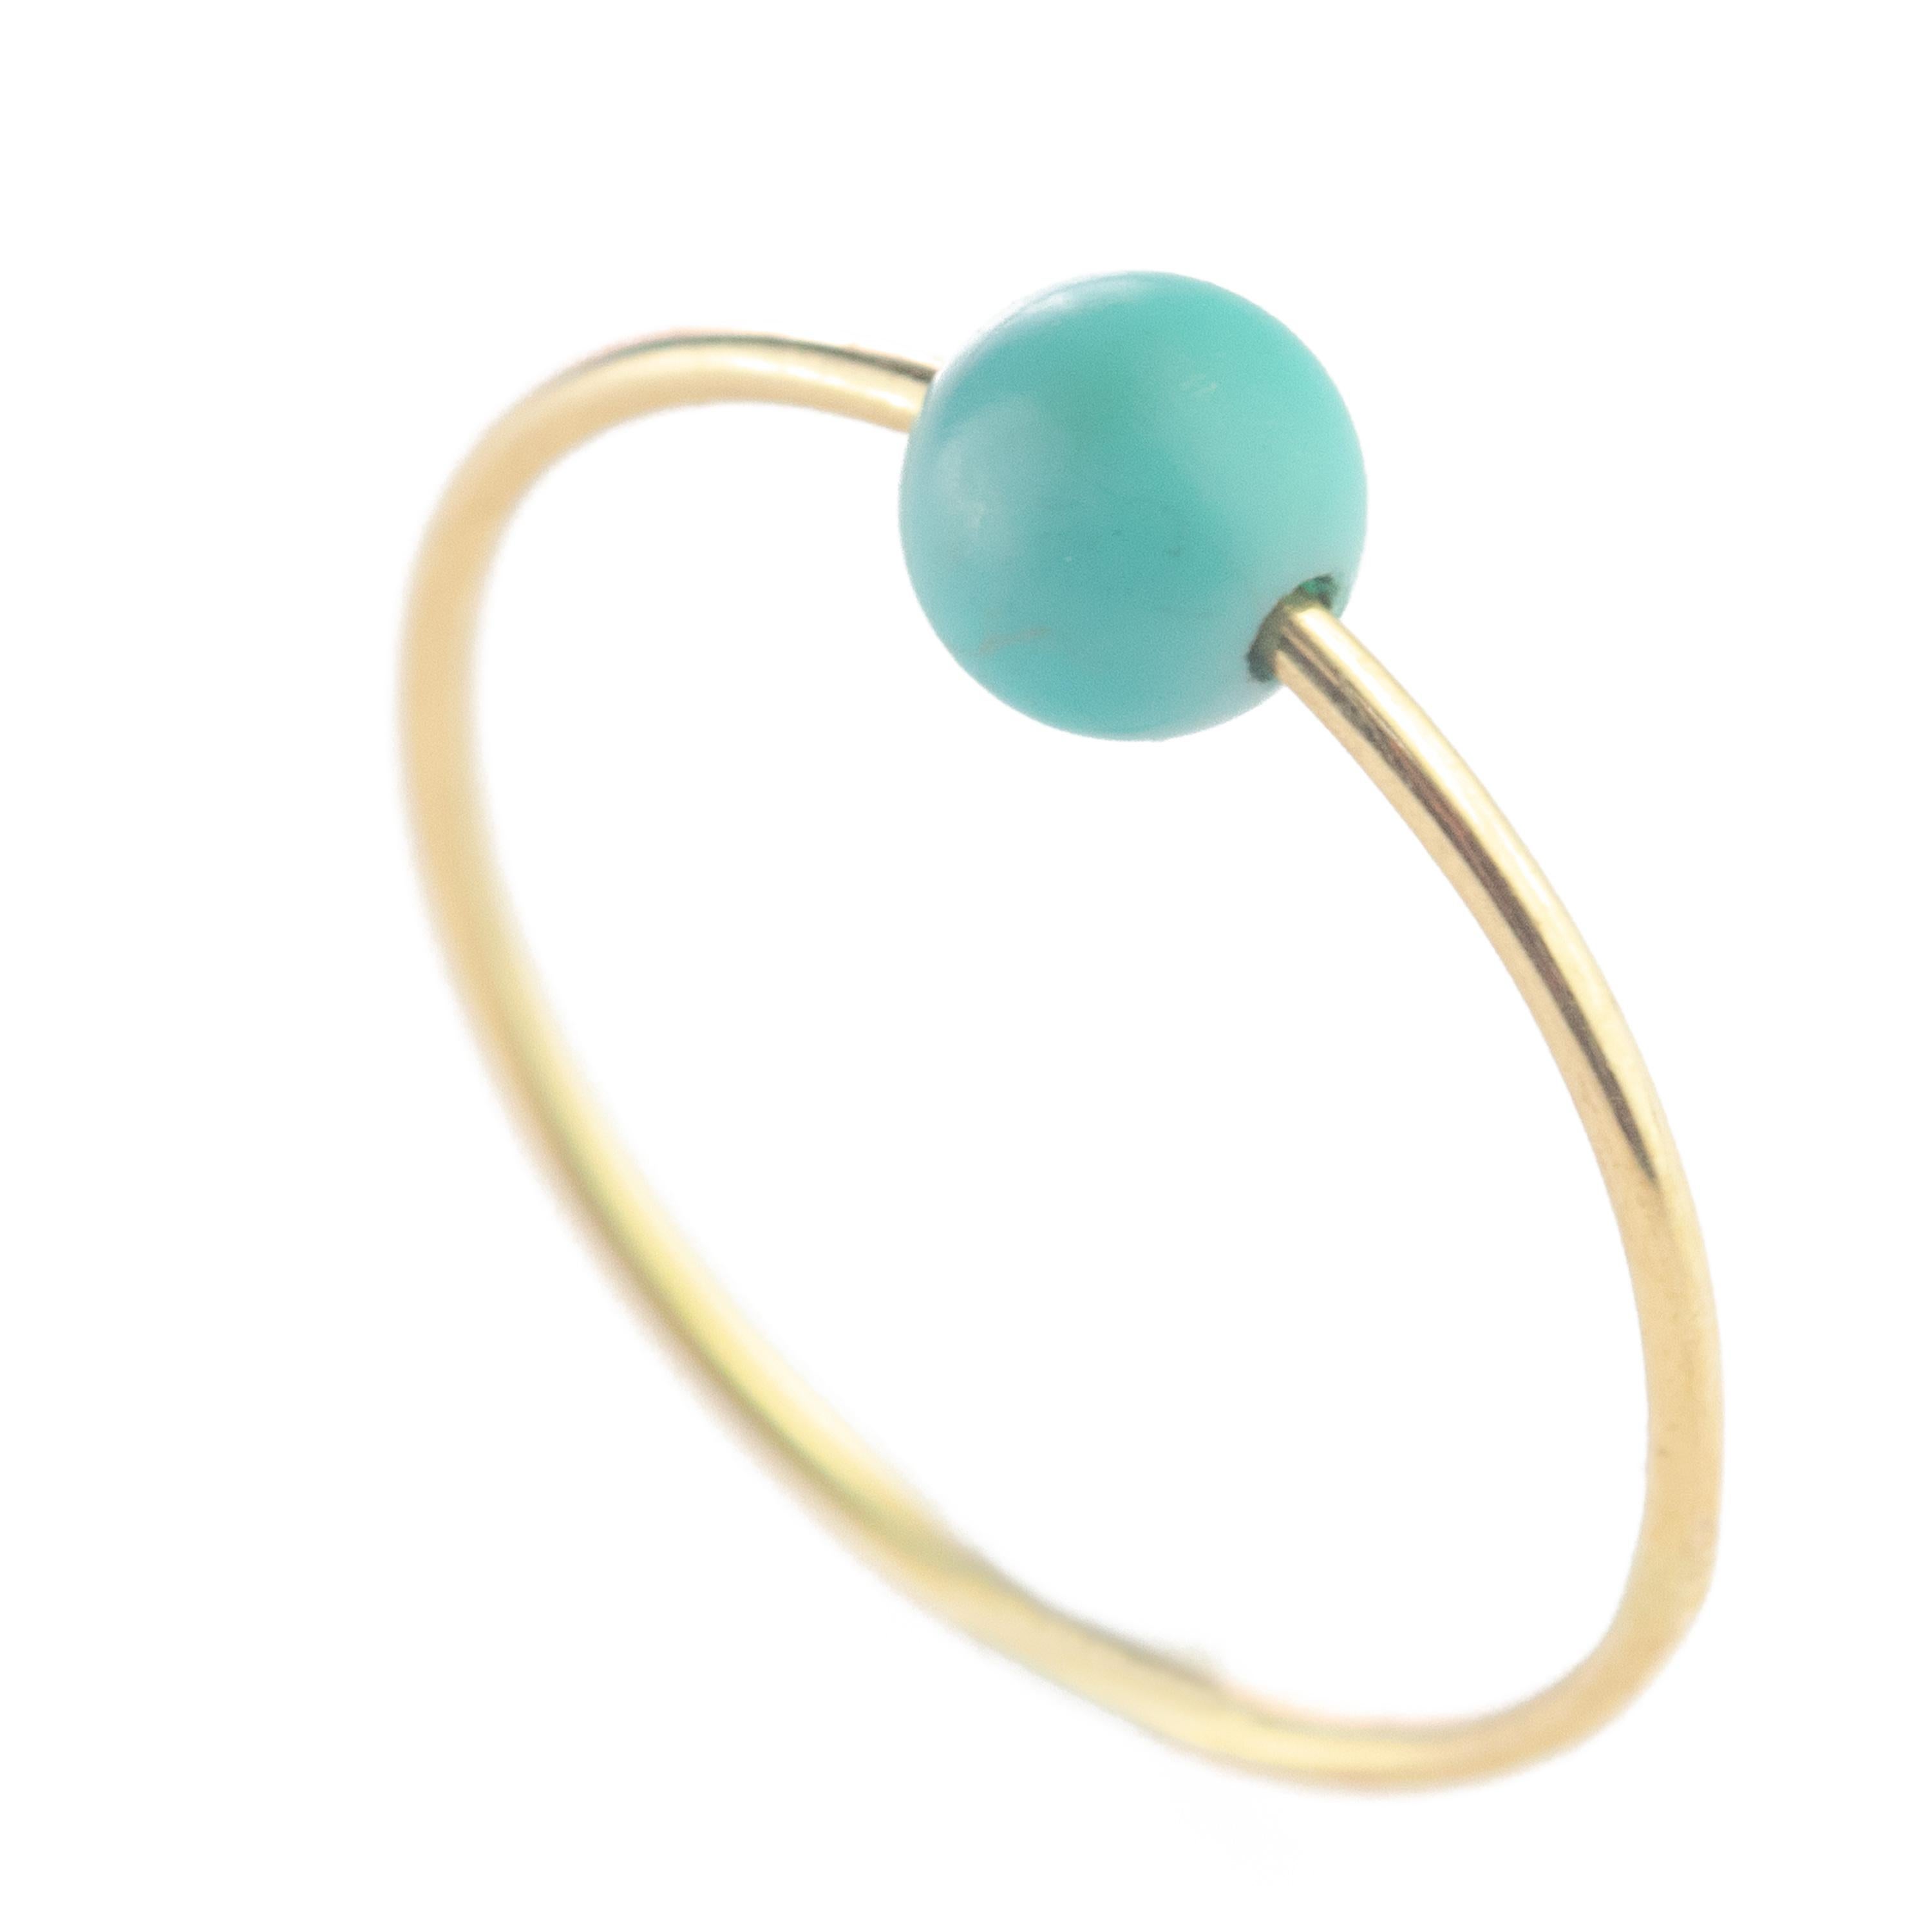 Signature INTINI Jewels Neptune Planet band ring. Contemporary ring design in 9 karat yellow gold with a precious round turquoise.  Design and color mixed in one jewel. Delight yourself with a strong, minimalist design, just for a stunning chic